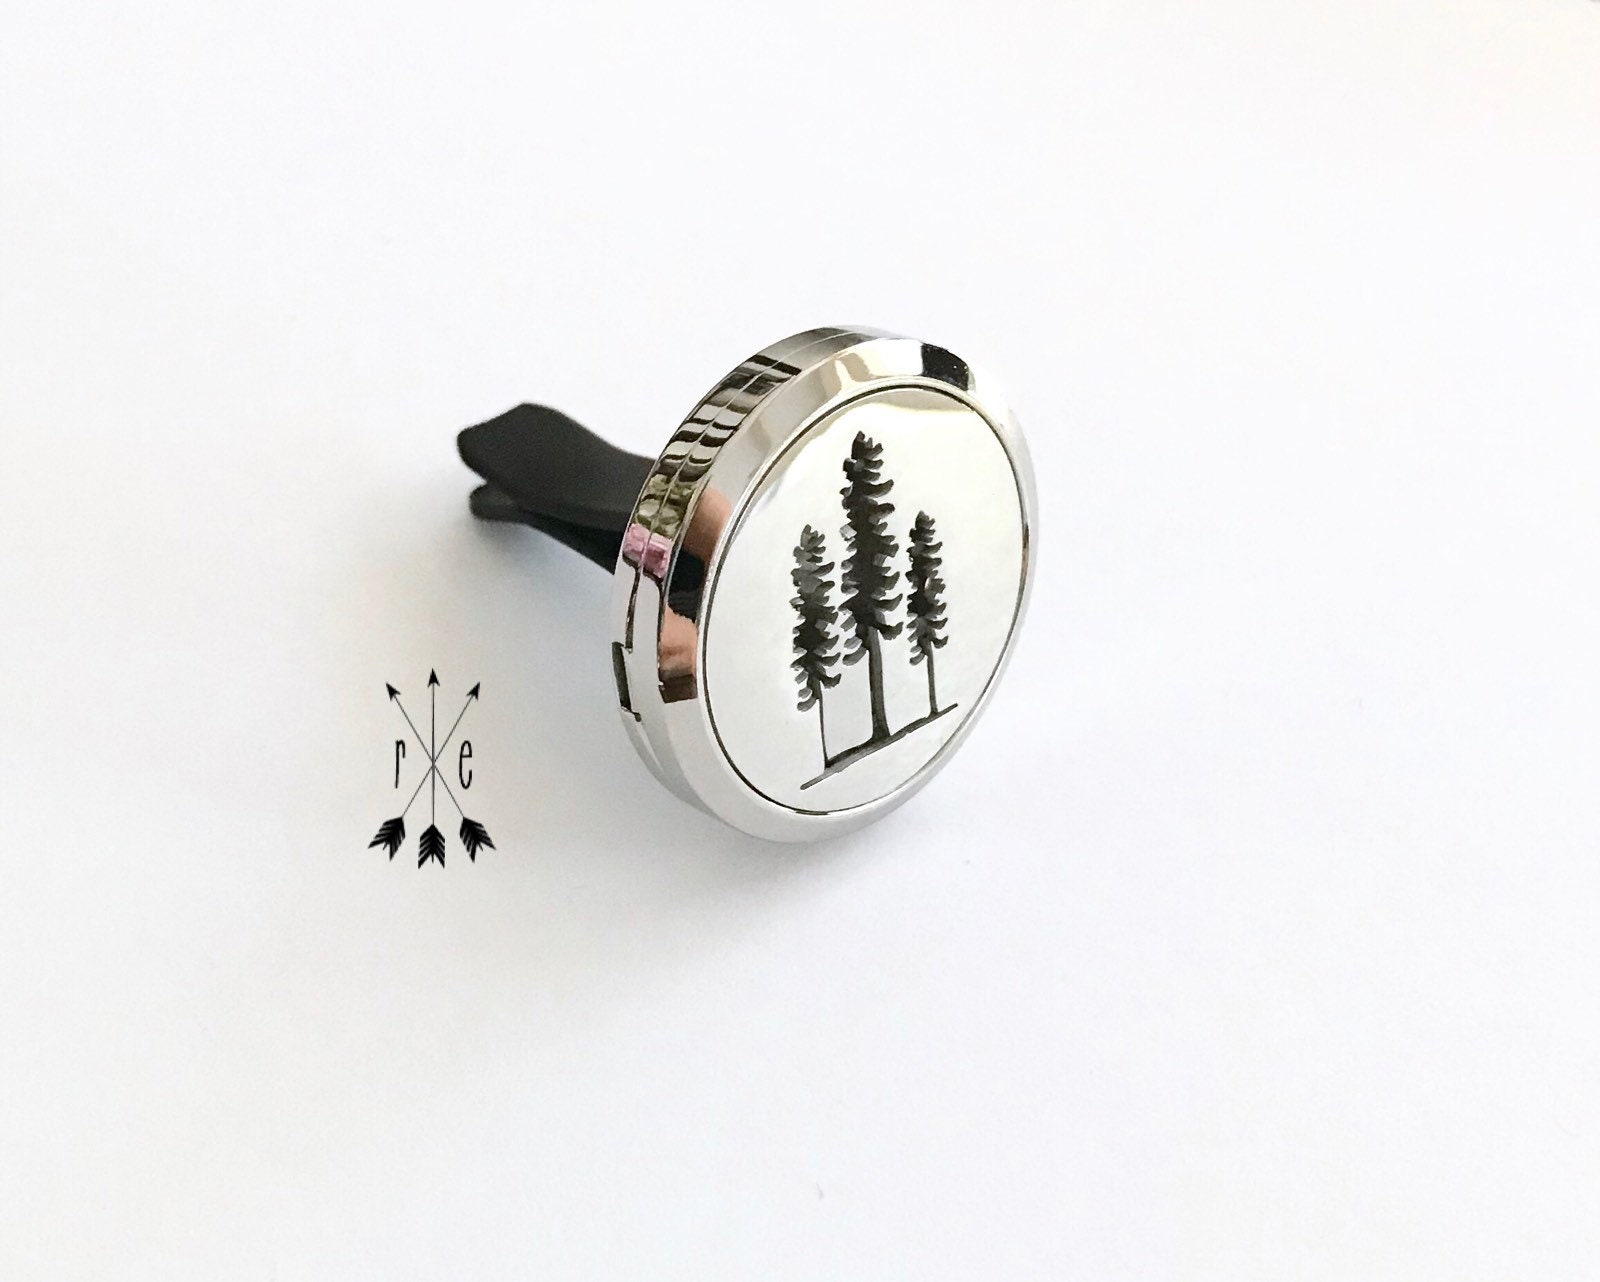 Sikta Tree Stainless Steel Car Diffuser; Aromatherapy Car Diffuser